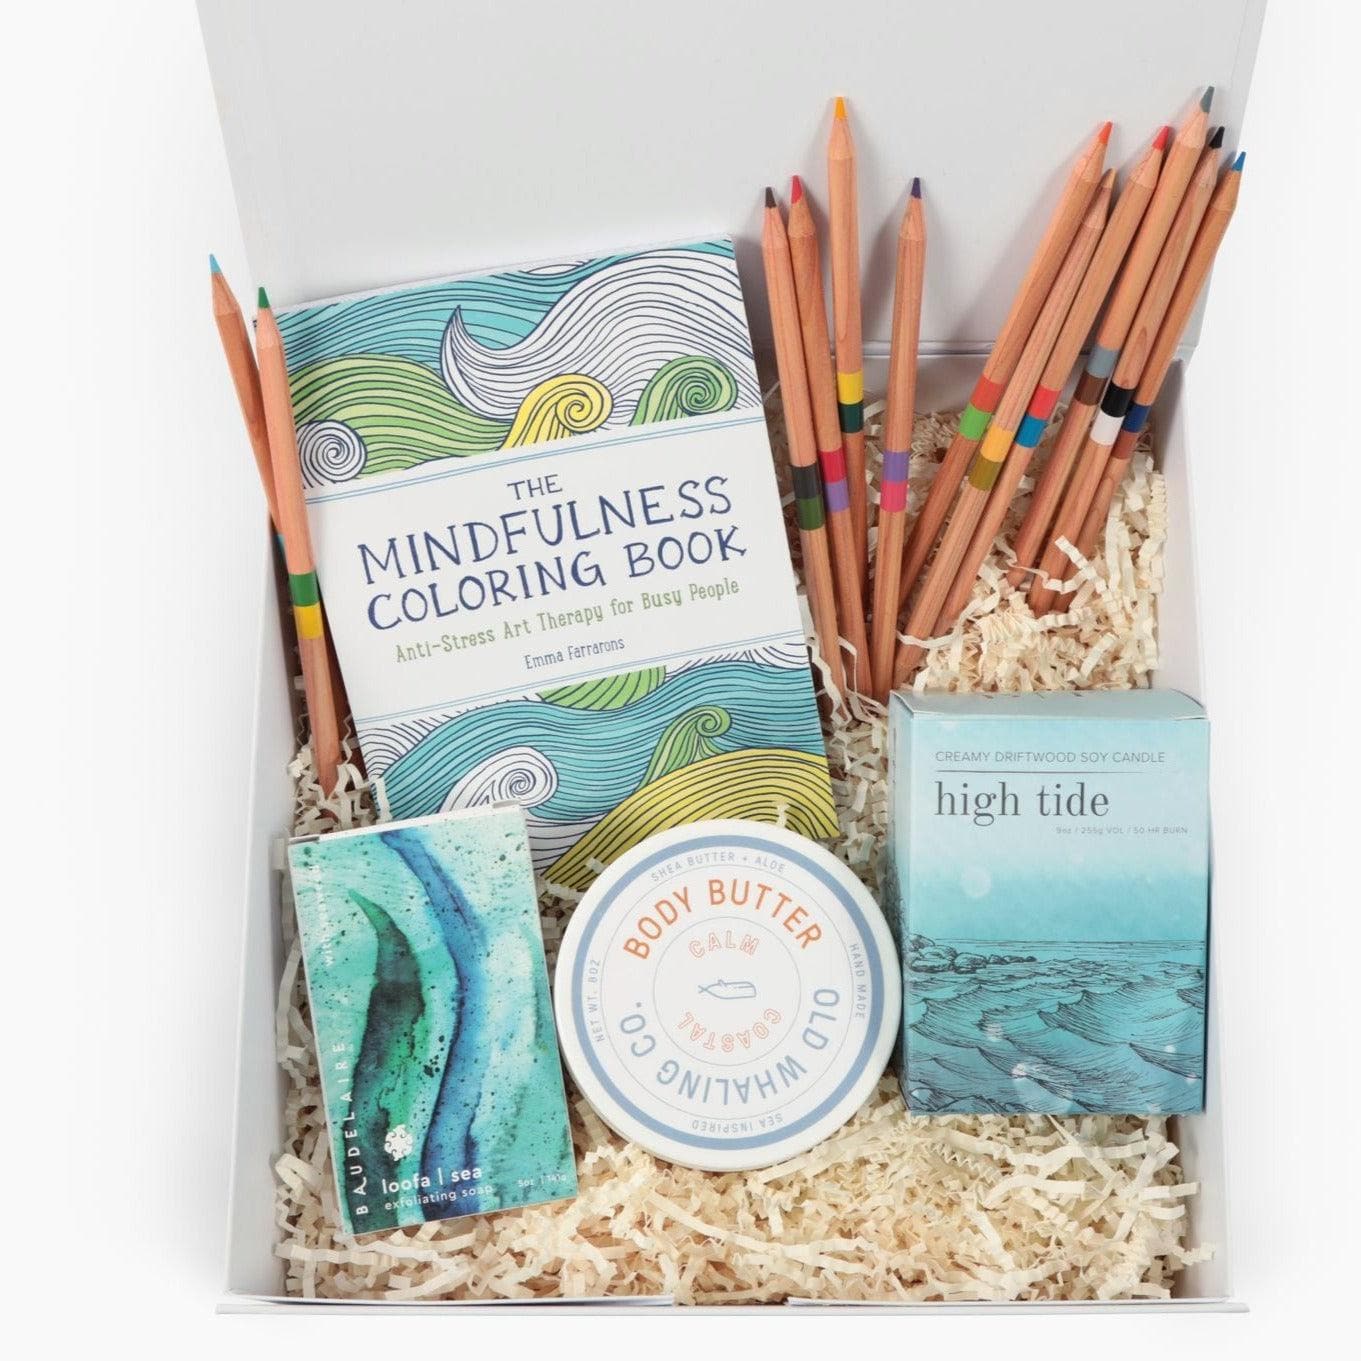 Self Care Gift Box, Adult Colouring Book and Pencil Set, Relaxing Gift Box,  De-stress and Pamper Box, Gift for Friend, Calm Gift, Thank You 